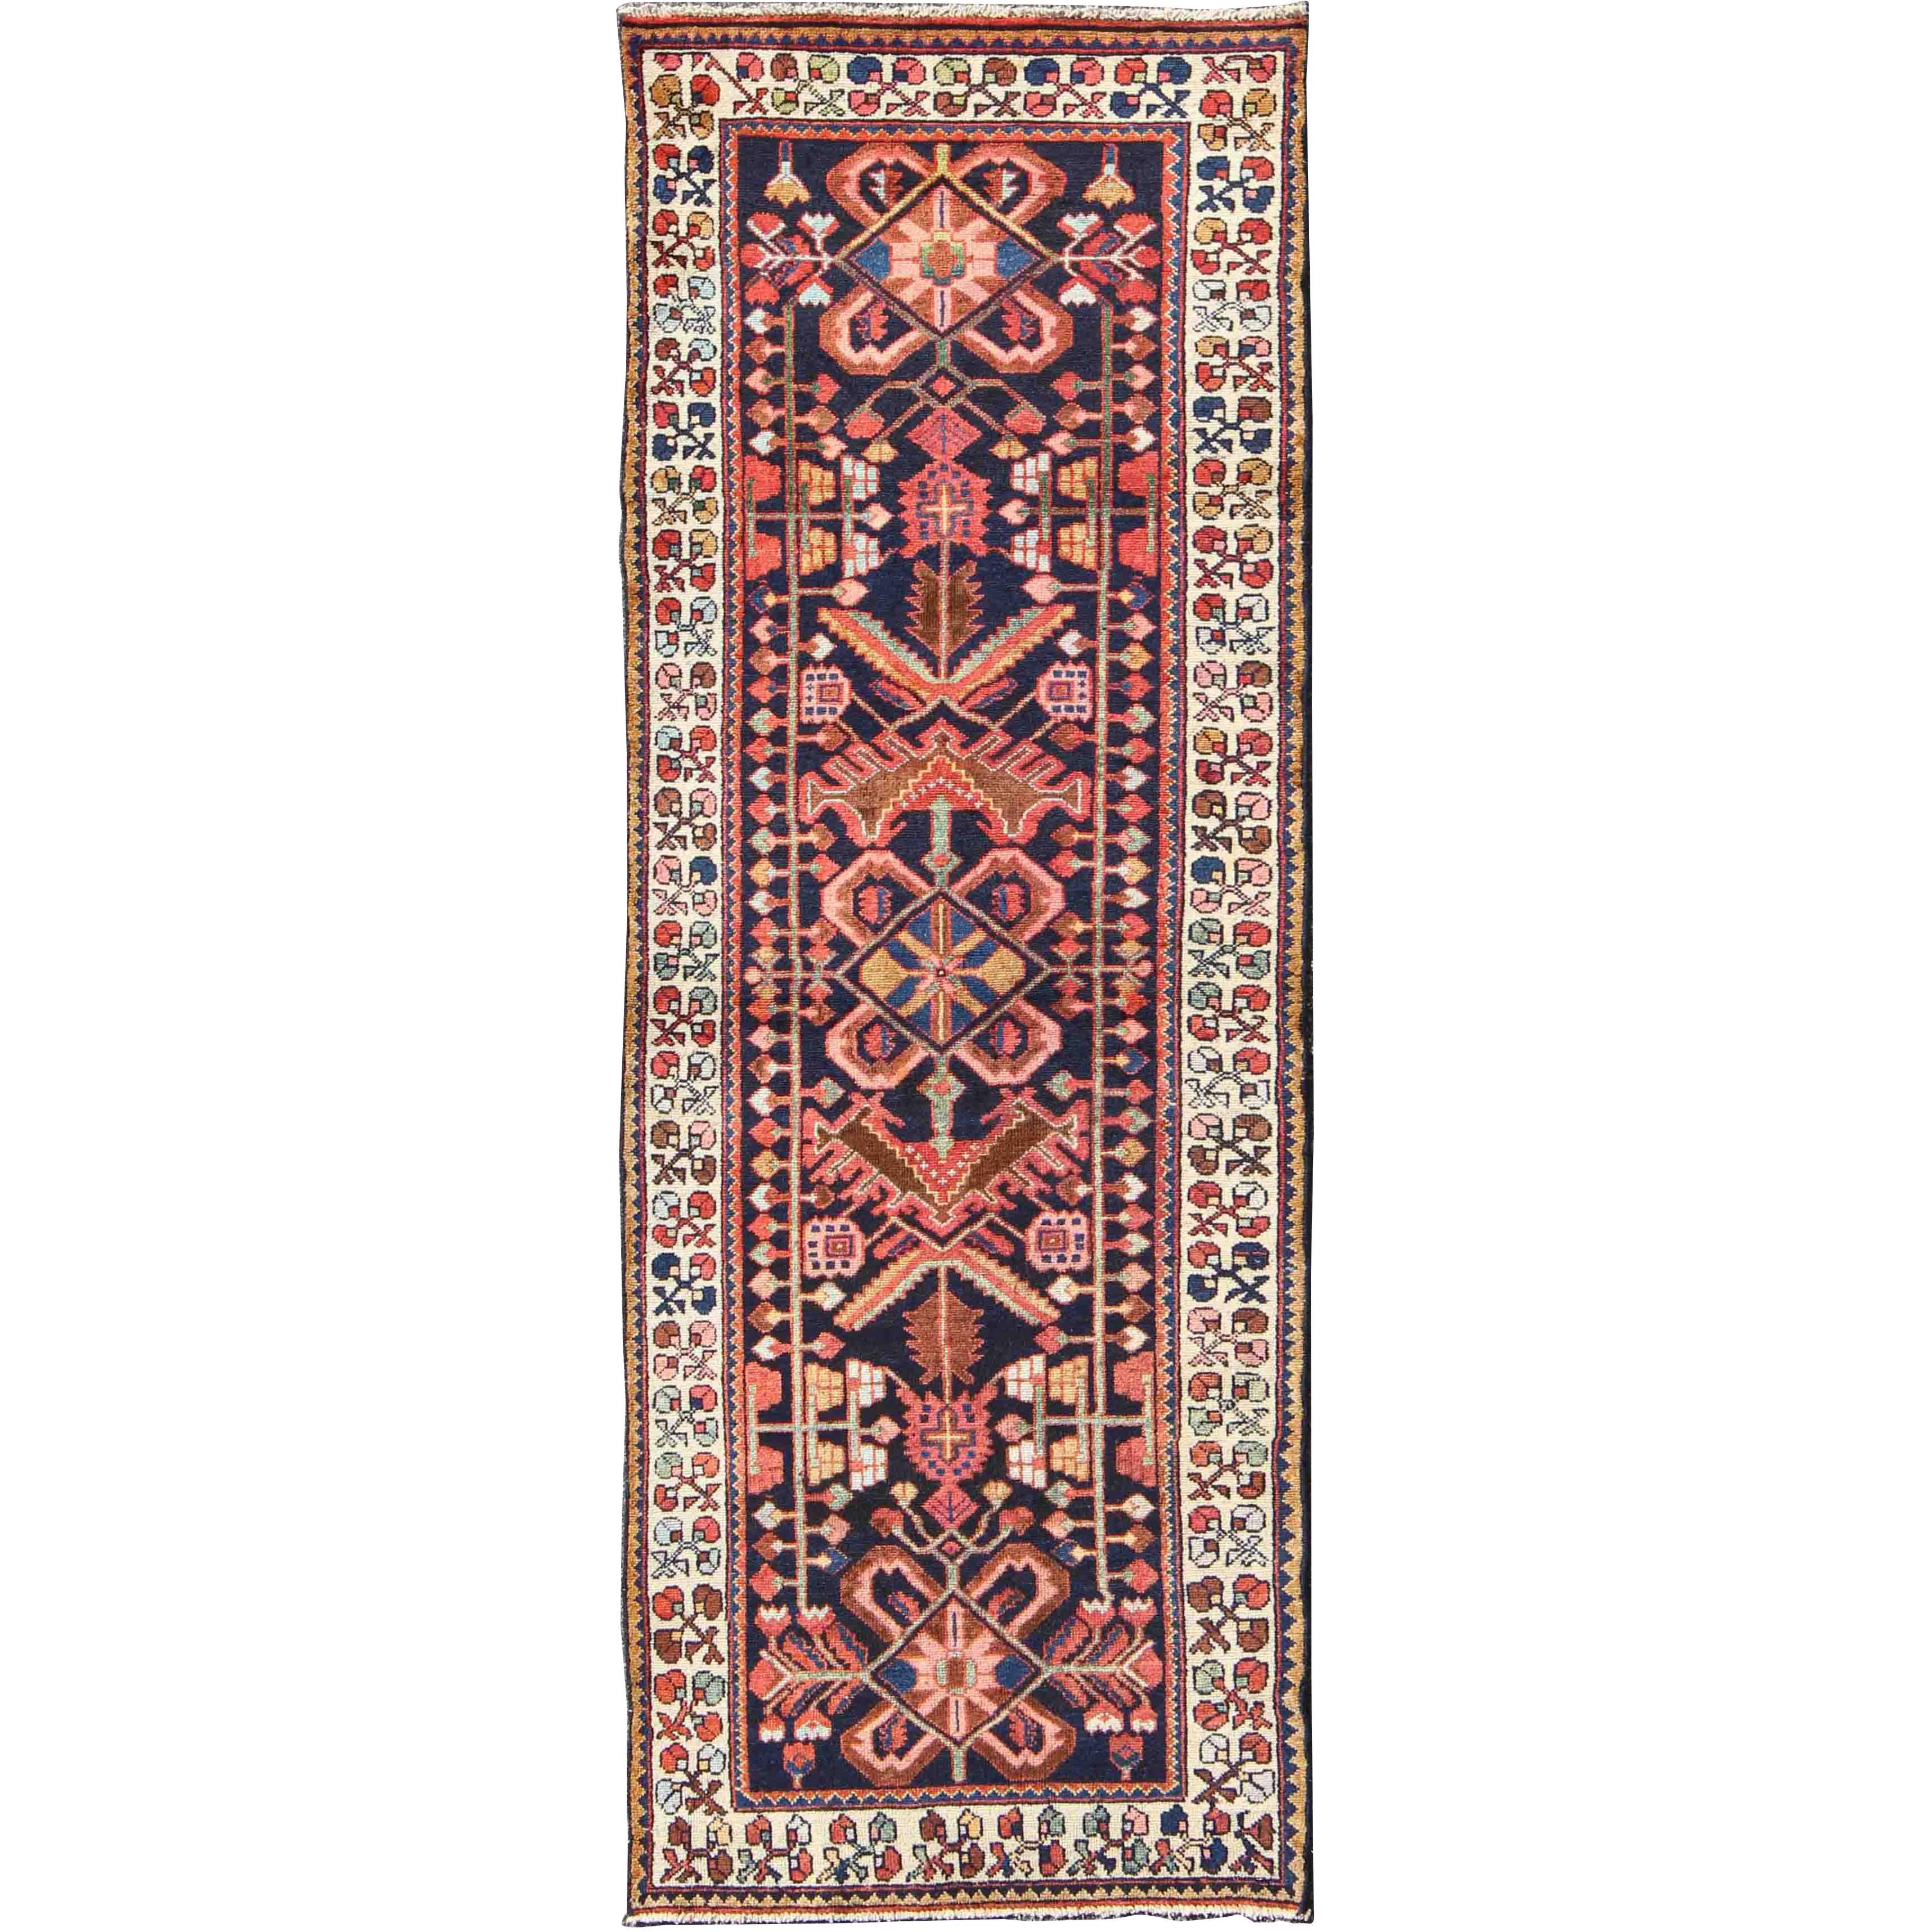 Tribal Midcentury Persian Hamedan Rug in Midnight Blue, Red, Green and Brown